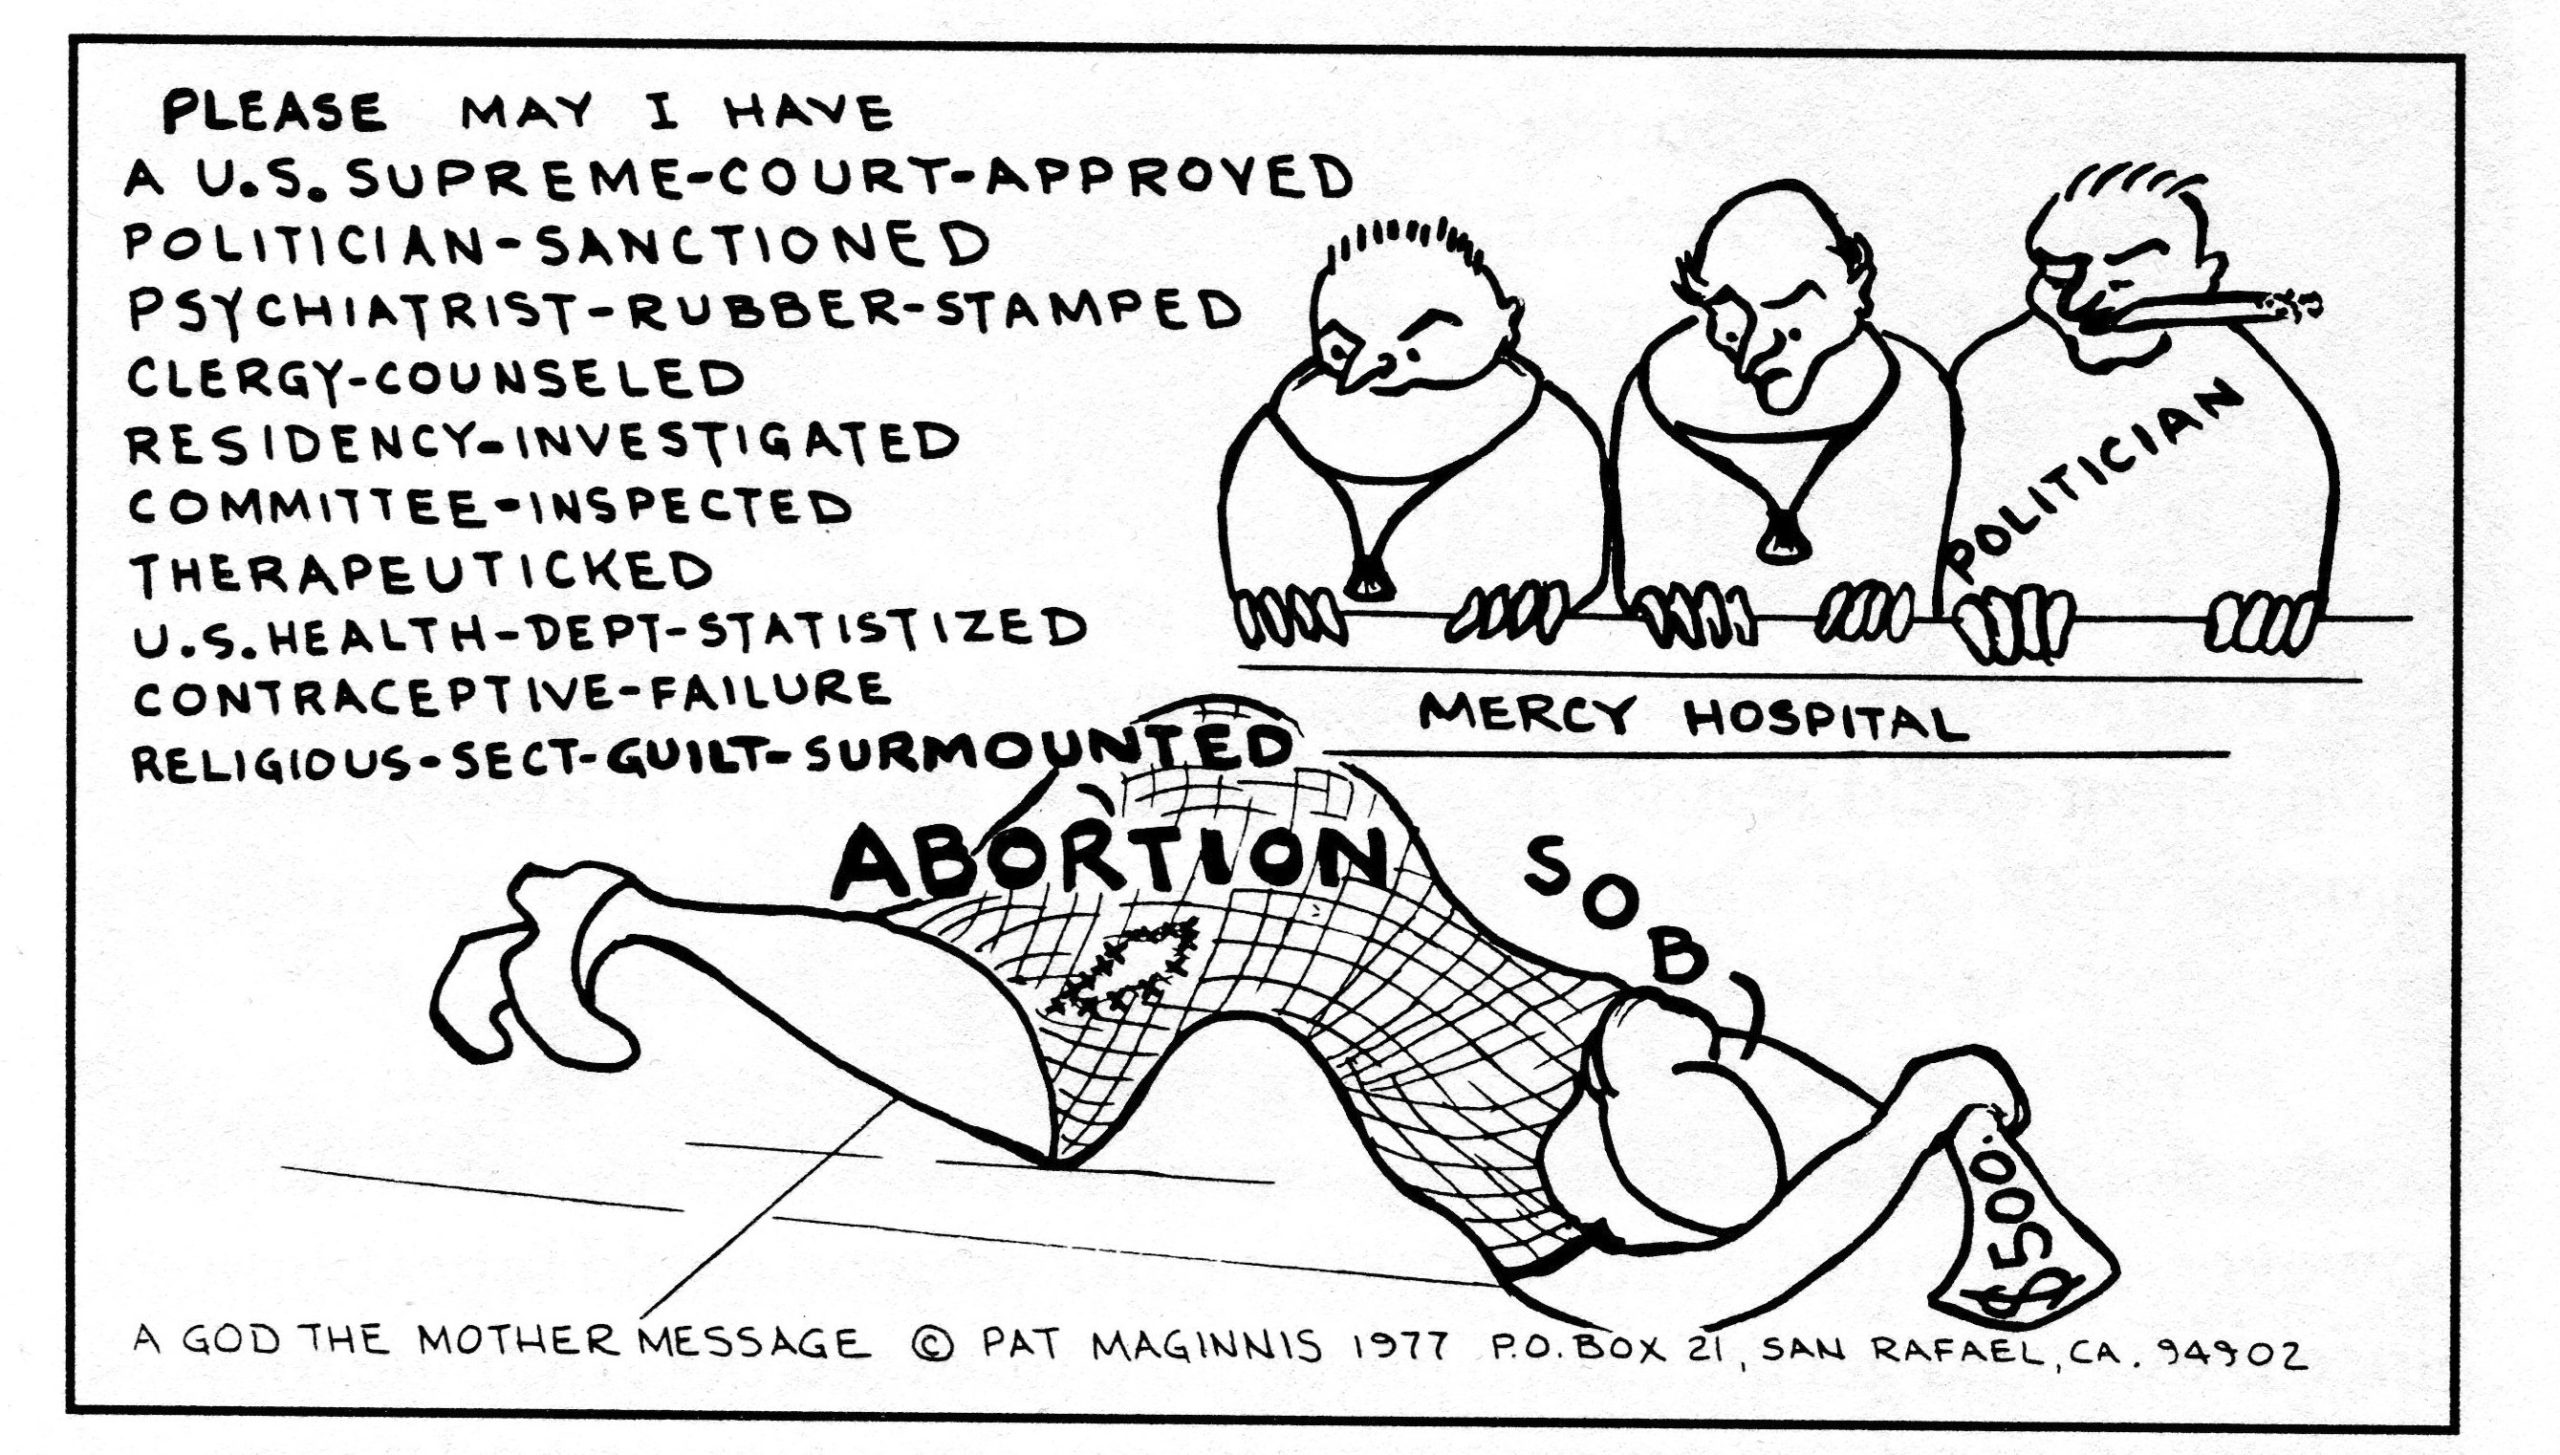 Image of woman on her knees in front of board of three men. She says: Please may I have a Supreme Court approved- politician sanctioned- psychiatrist rubber stamped- clergy counseled- residency investigated- committee inspected- therapeuticked- U.S. Health Dept statistized- contraceptive failure- religious sect guilt surmounted abortion